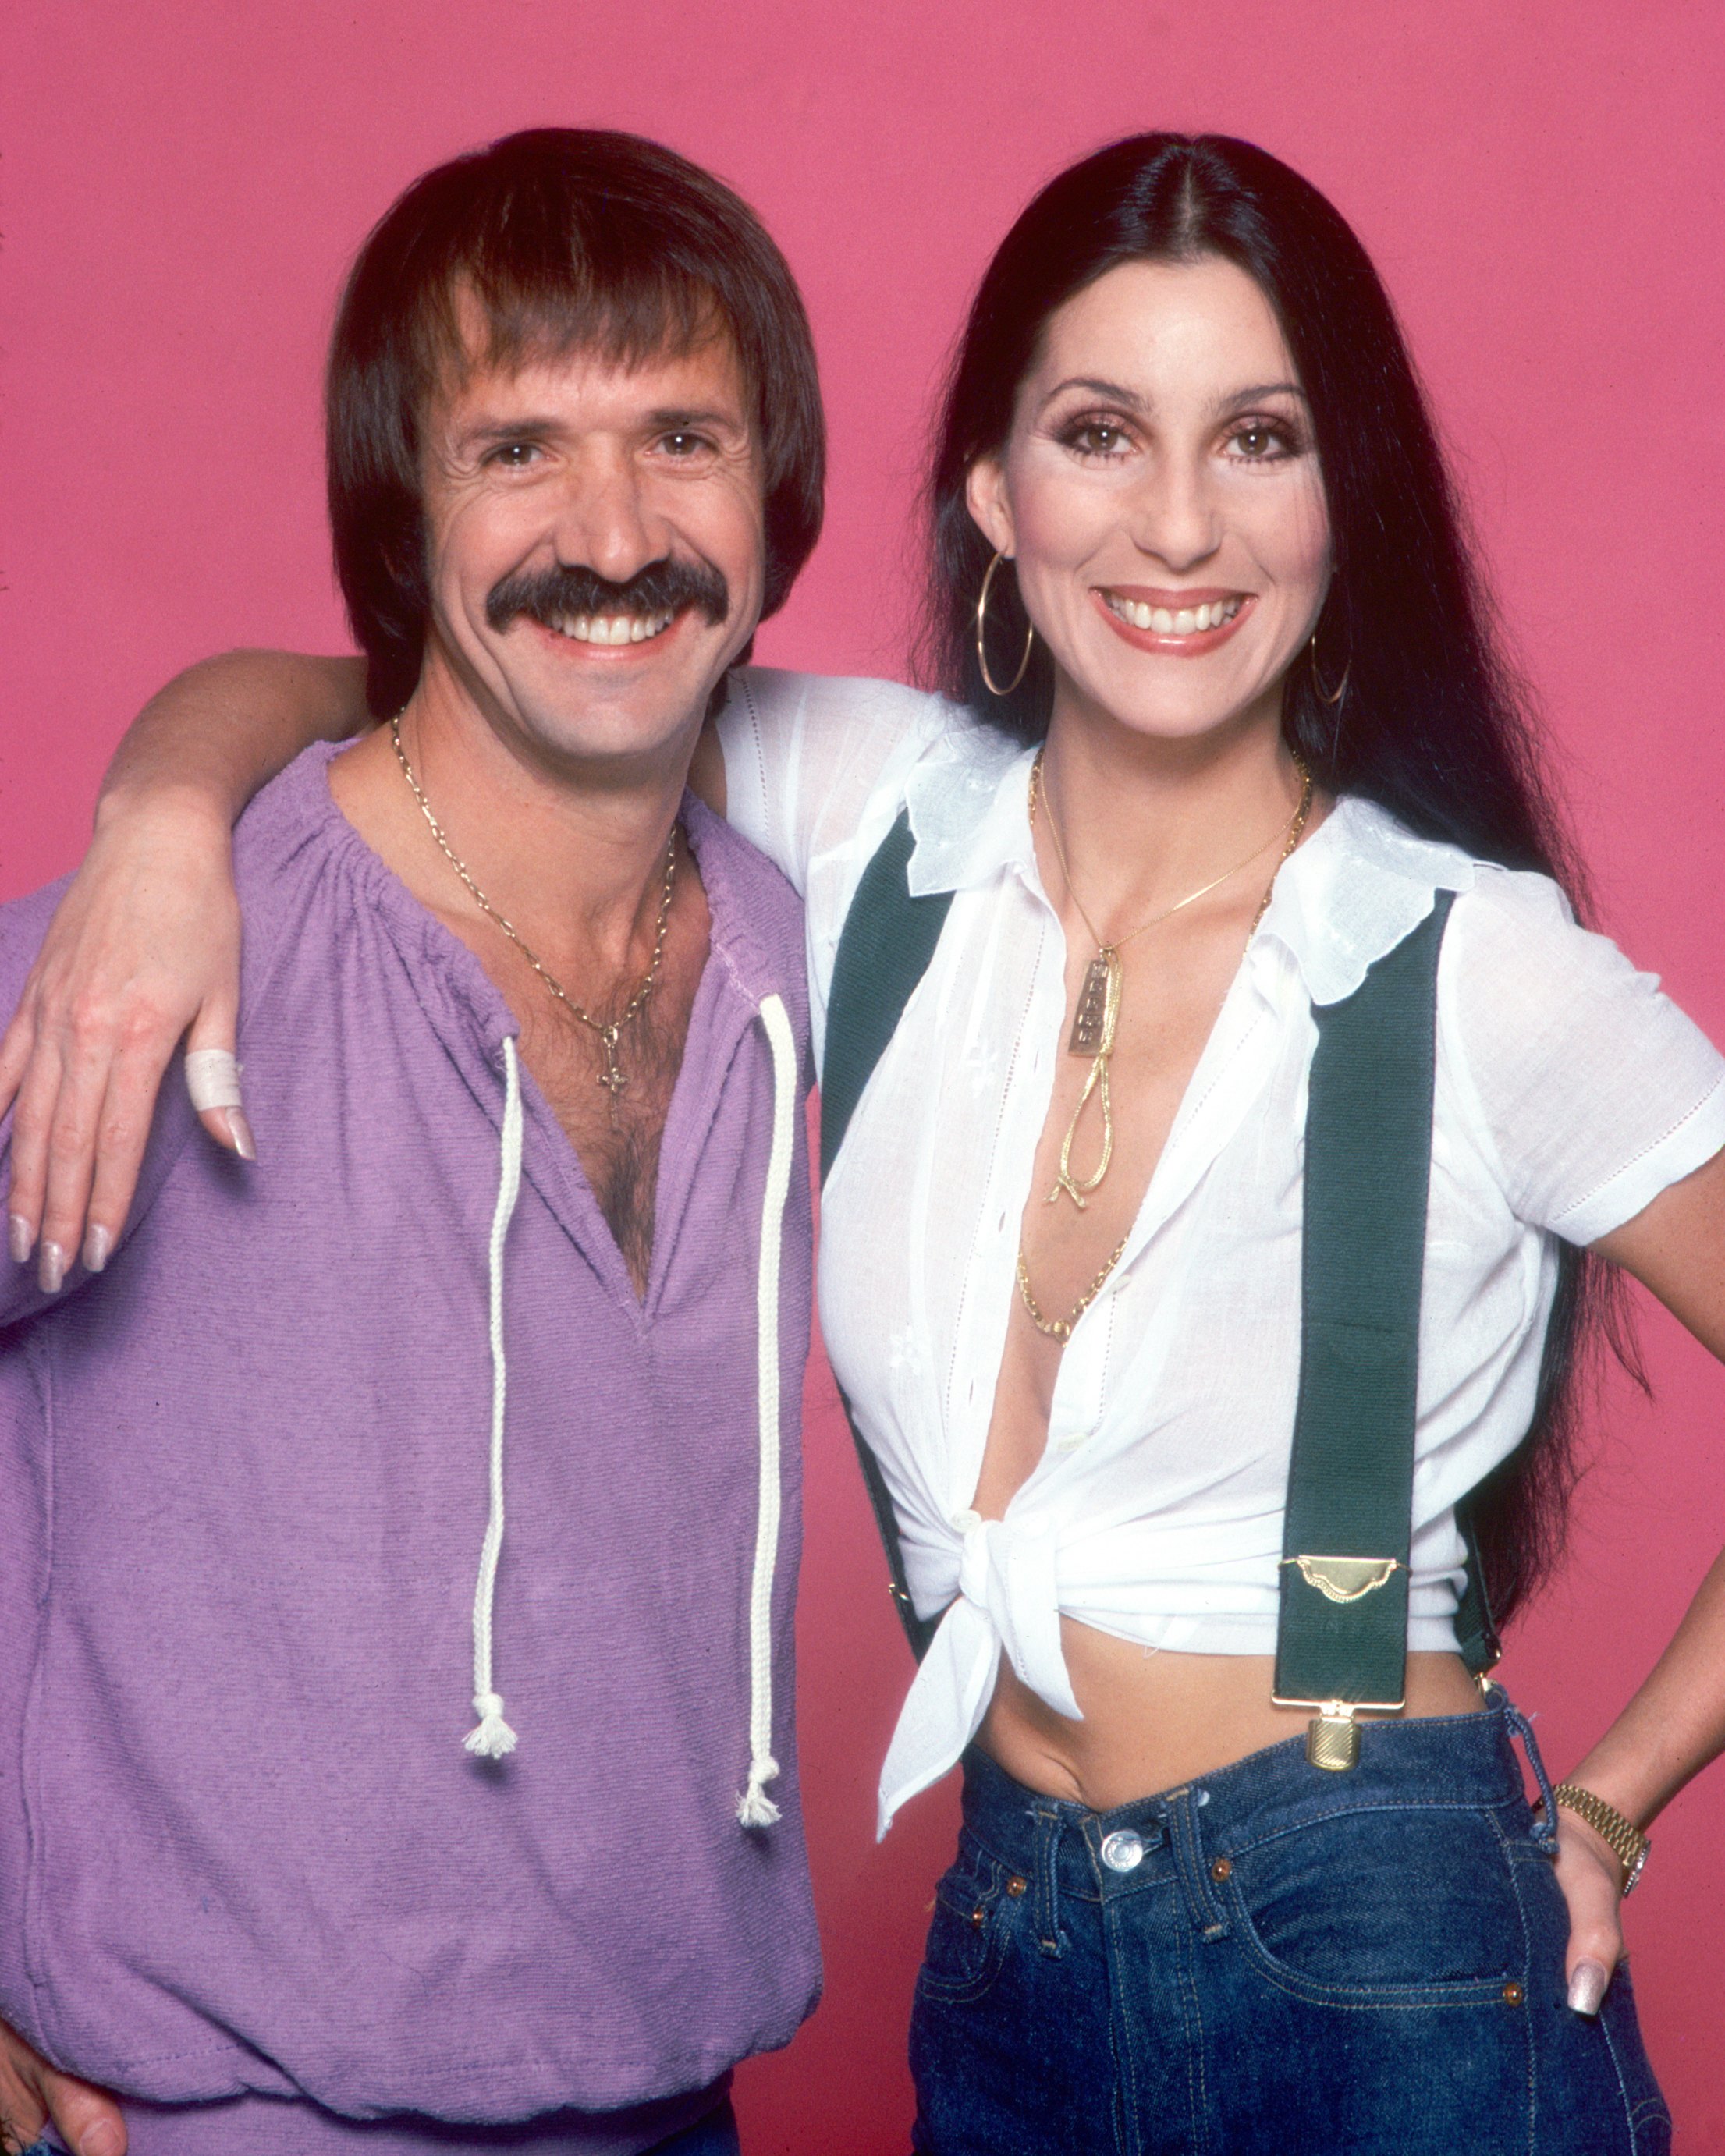 Sonny Bono and Cher pose for a portrait on July 22, 1977 in Los Angeles, California | Source: Getty Images